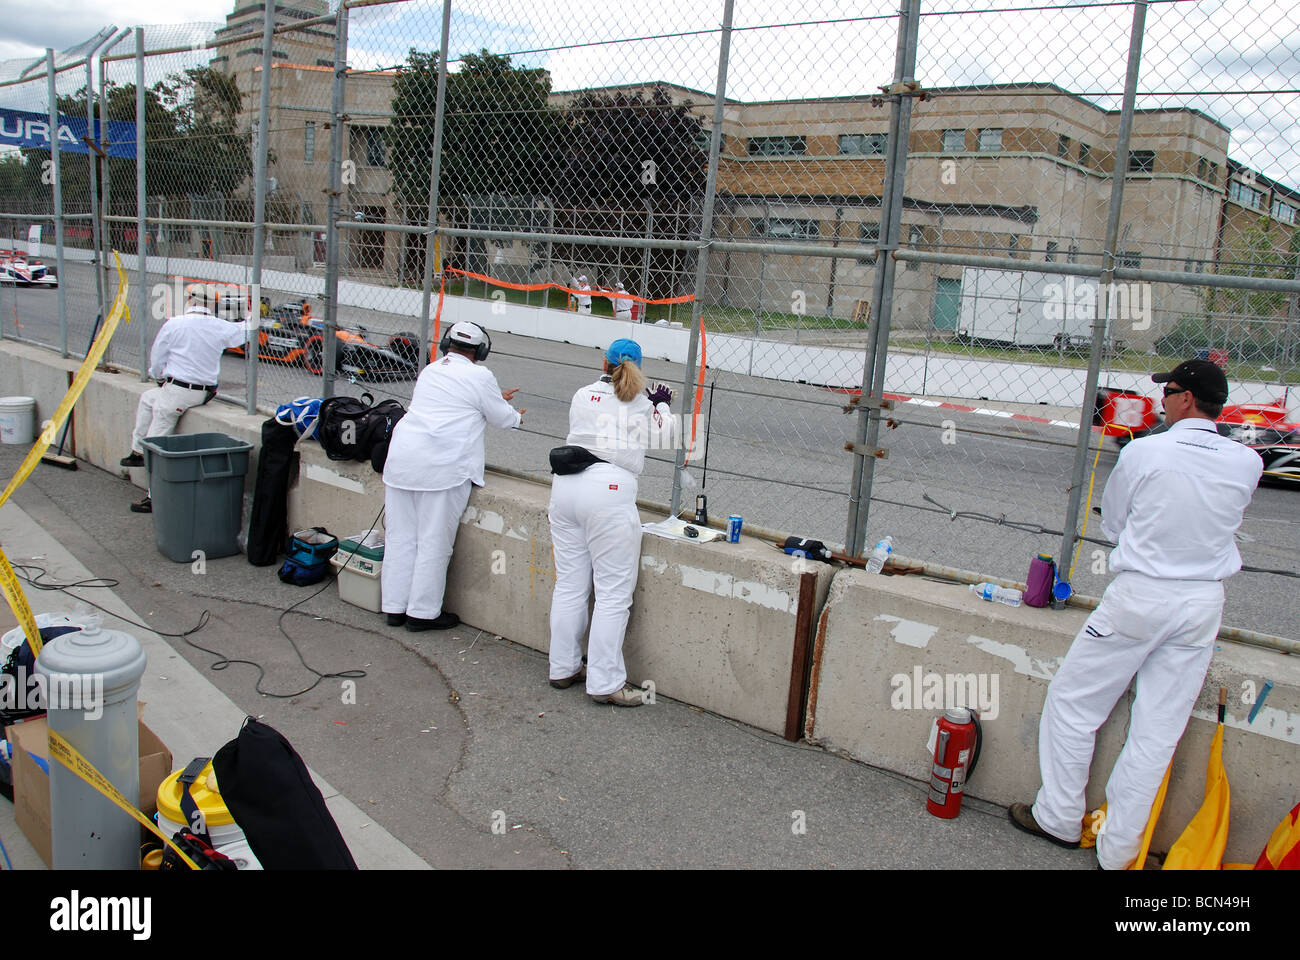 Safety officials watch cars at the Honda Indy race in Toronto Ontario Canada Stock Photo